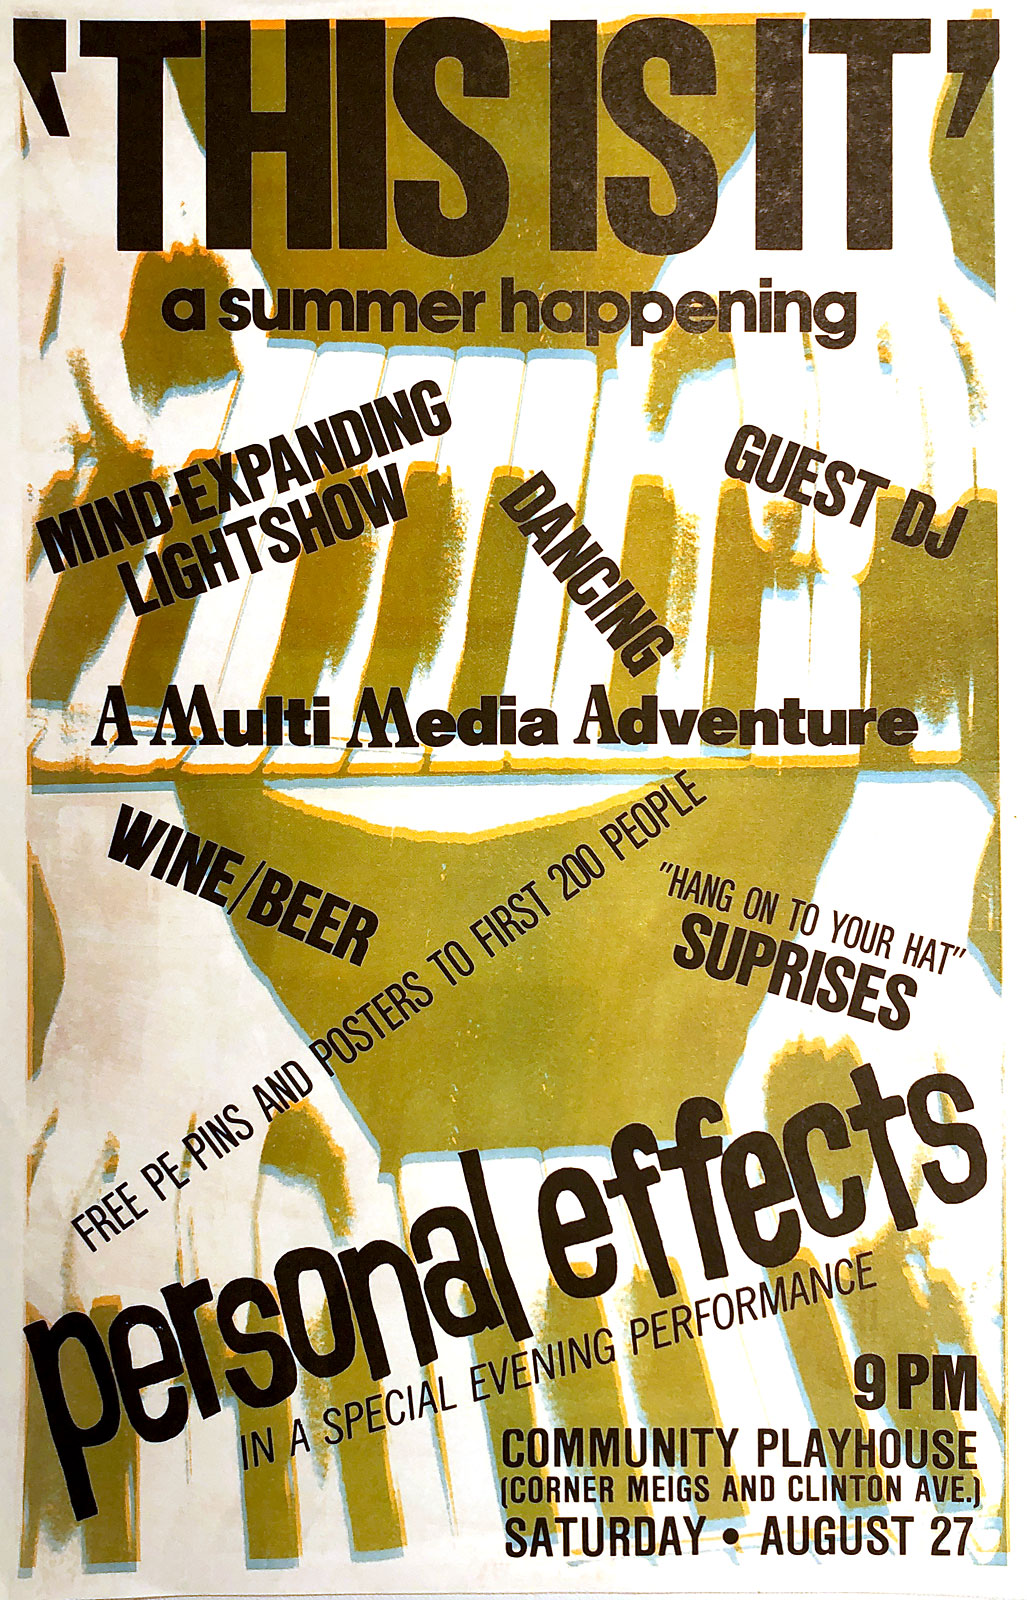 Poster for Personal Effects multi-media show at Community Playhouse, now Swillburgers, in Rochester, New York 08.27.1983